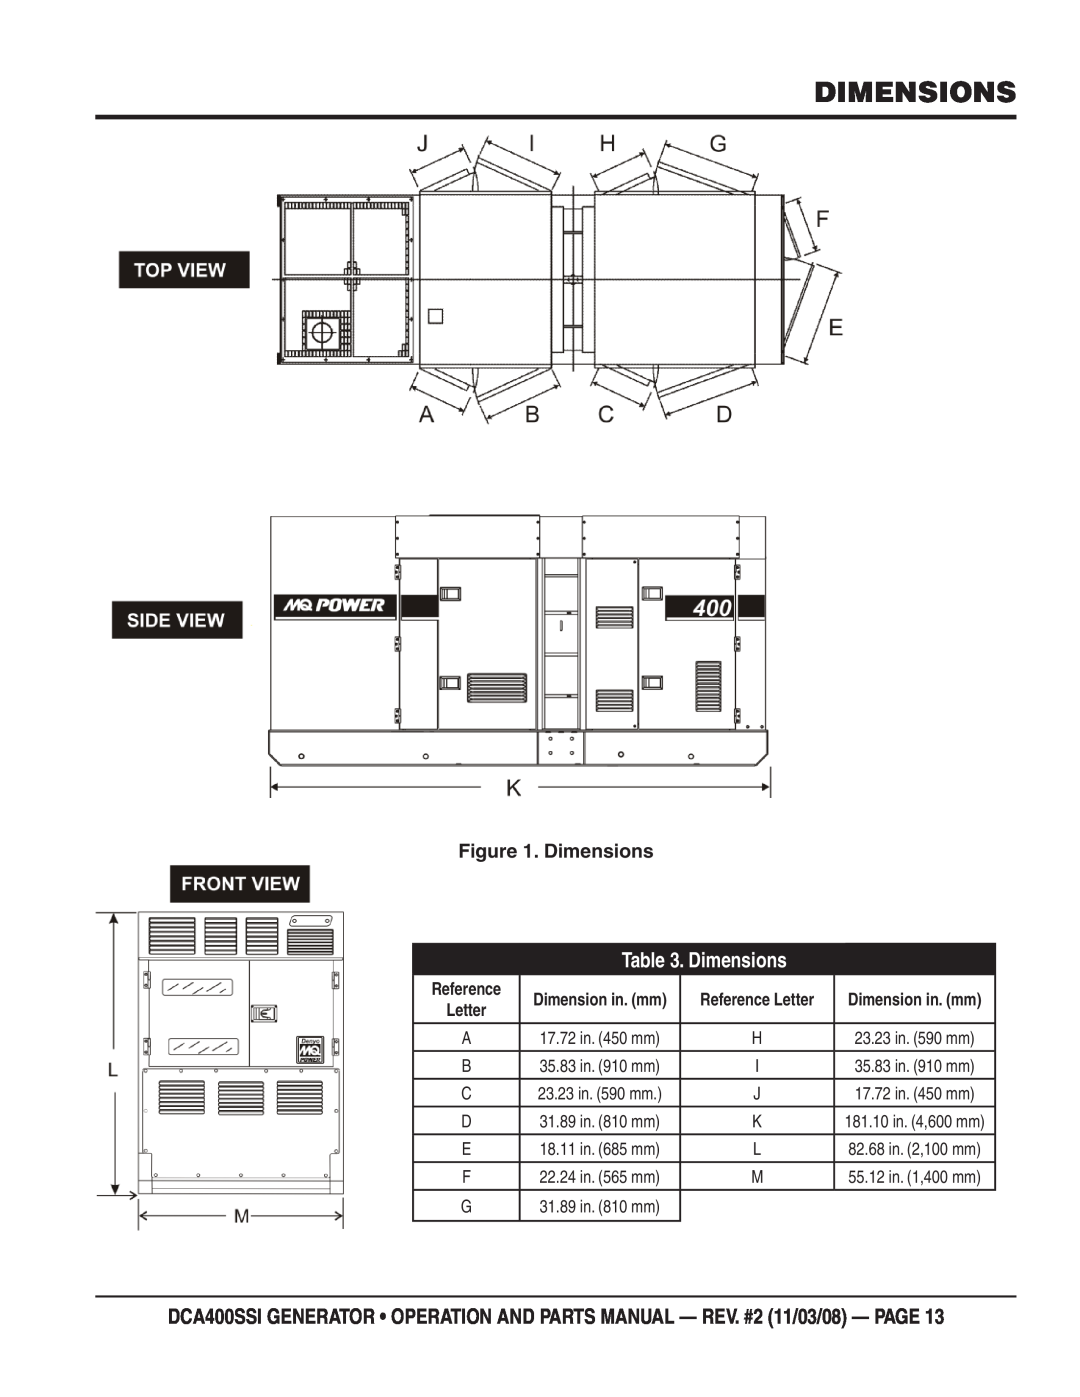 Multiquip DCA400SSI manual Dimensions, Reference 